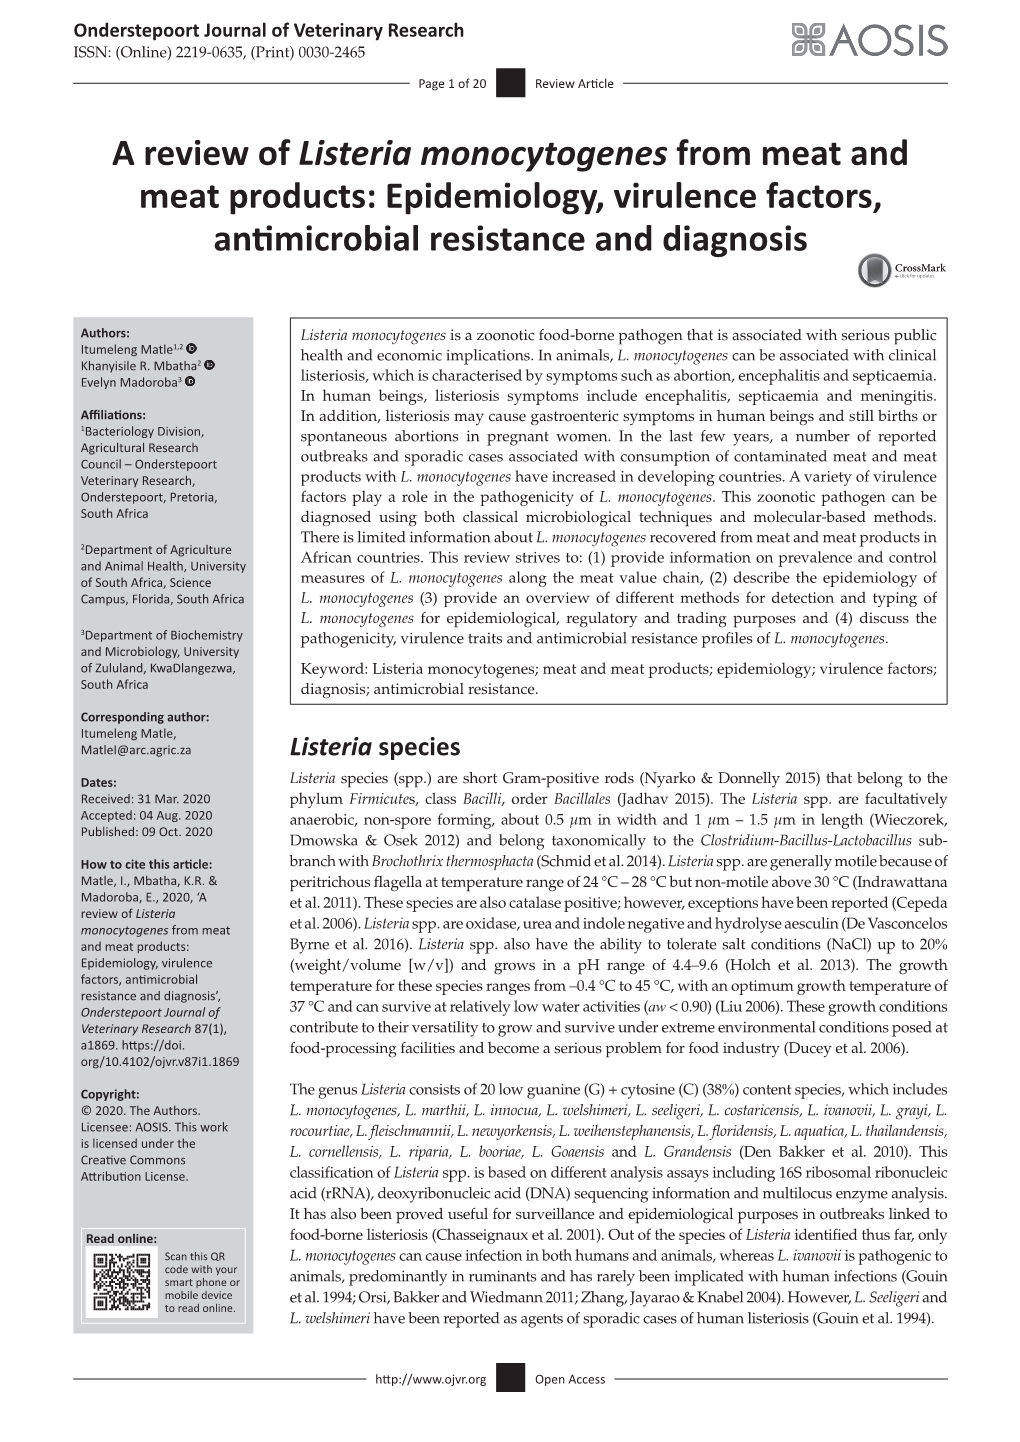 A Review of Listeria Monocytogenes from Meat and Meat Products: Epidemiology, Virulence Factors, Antimicrobial Resistance and Diagnosis